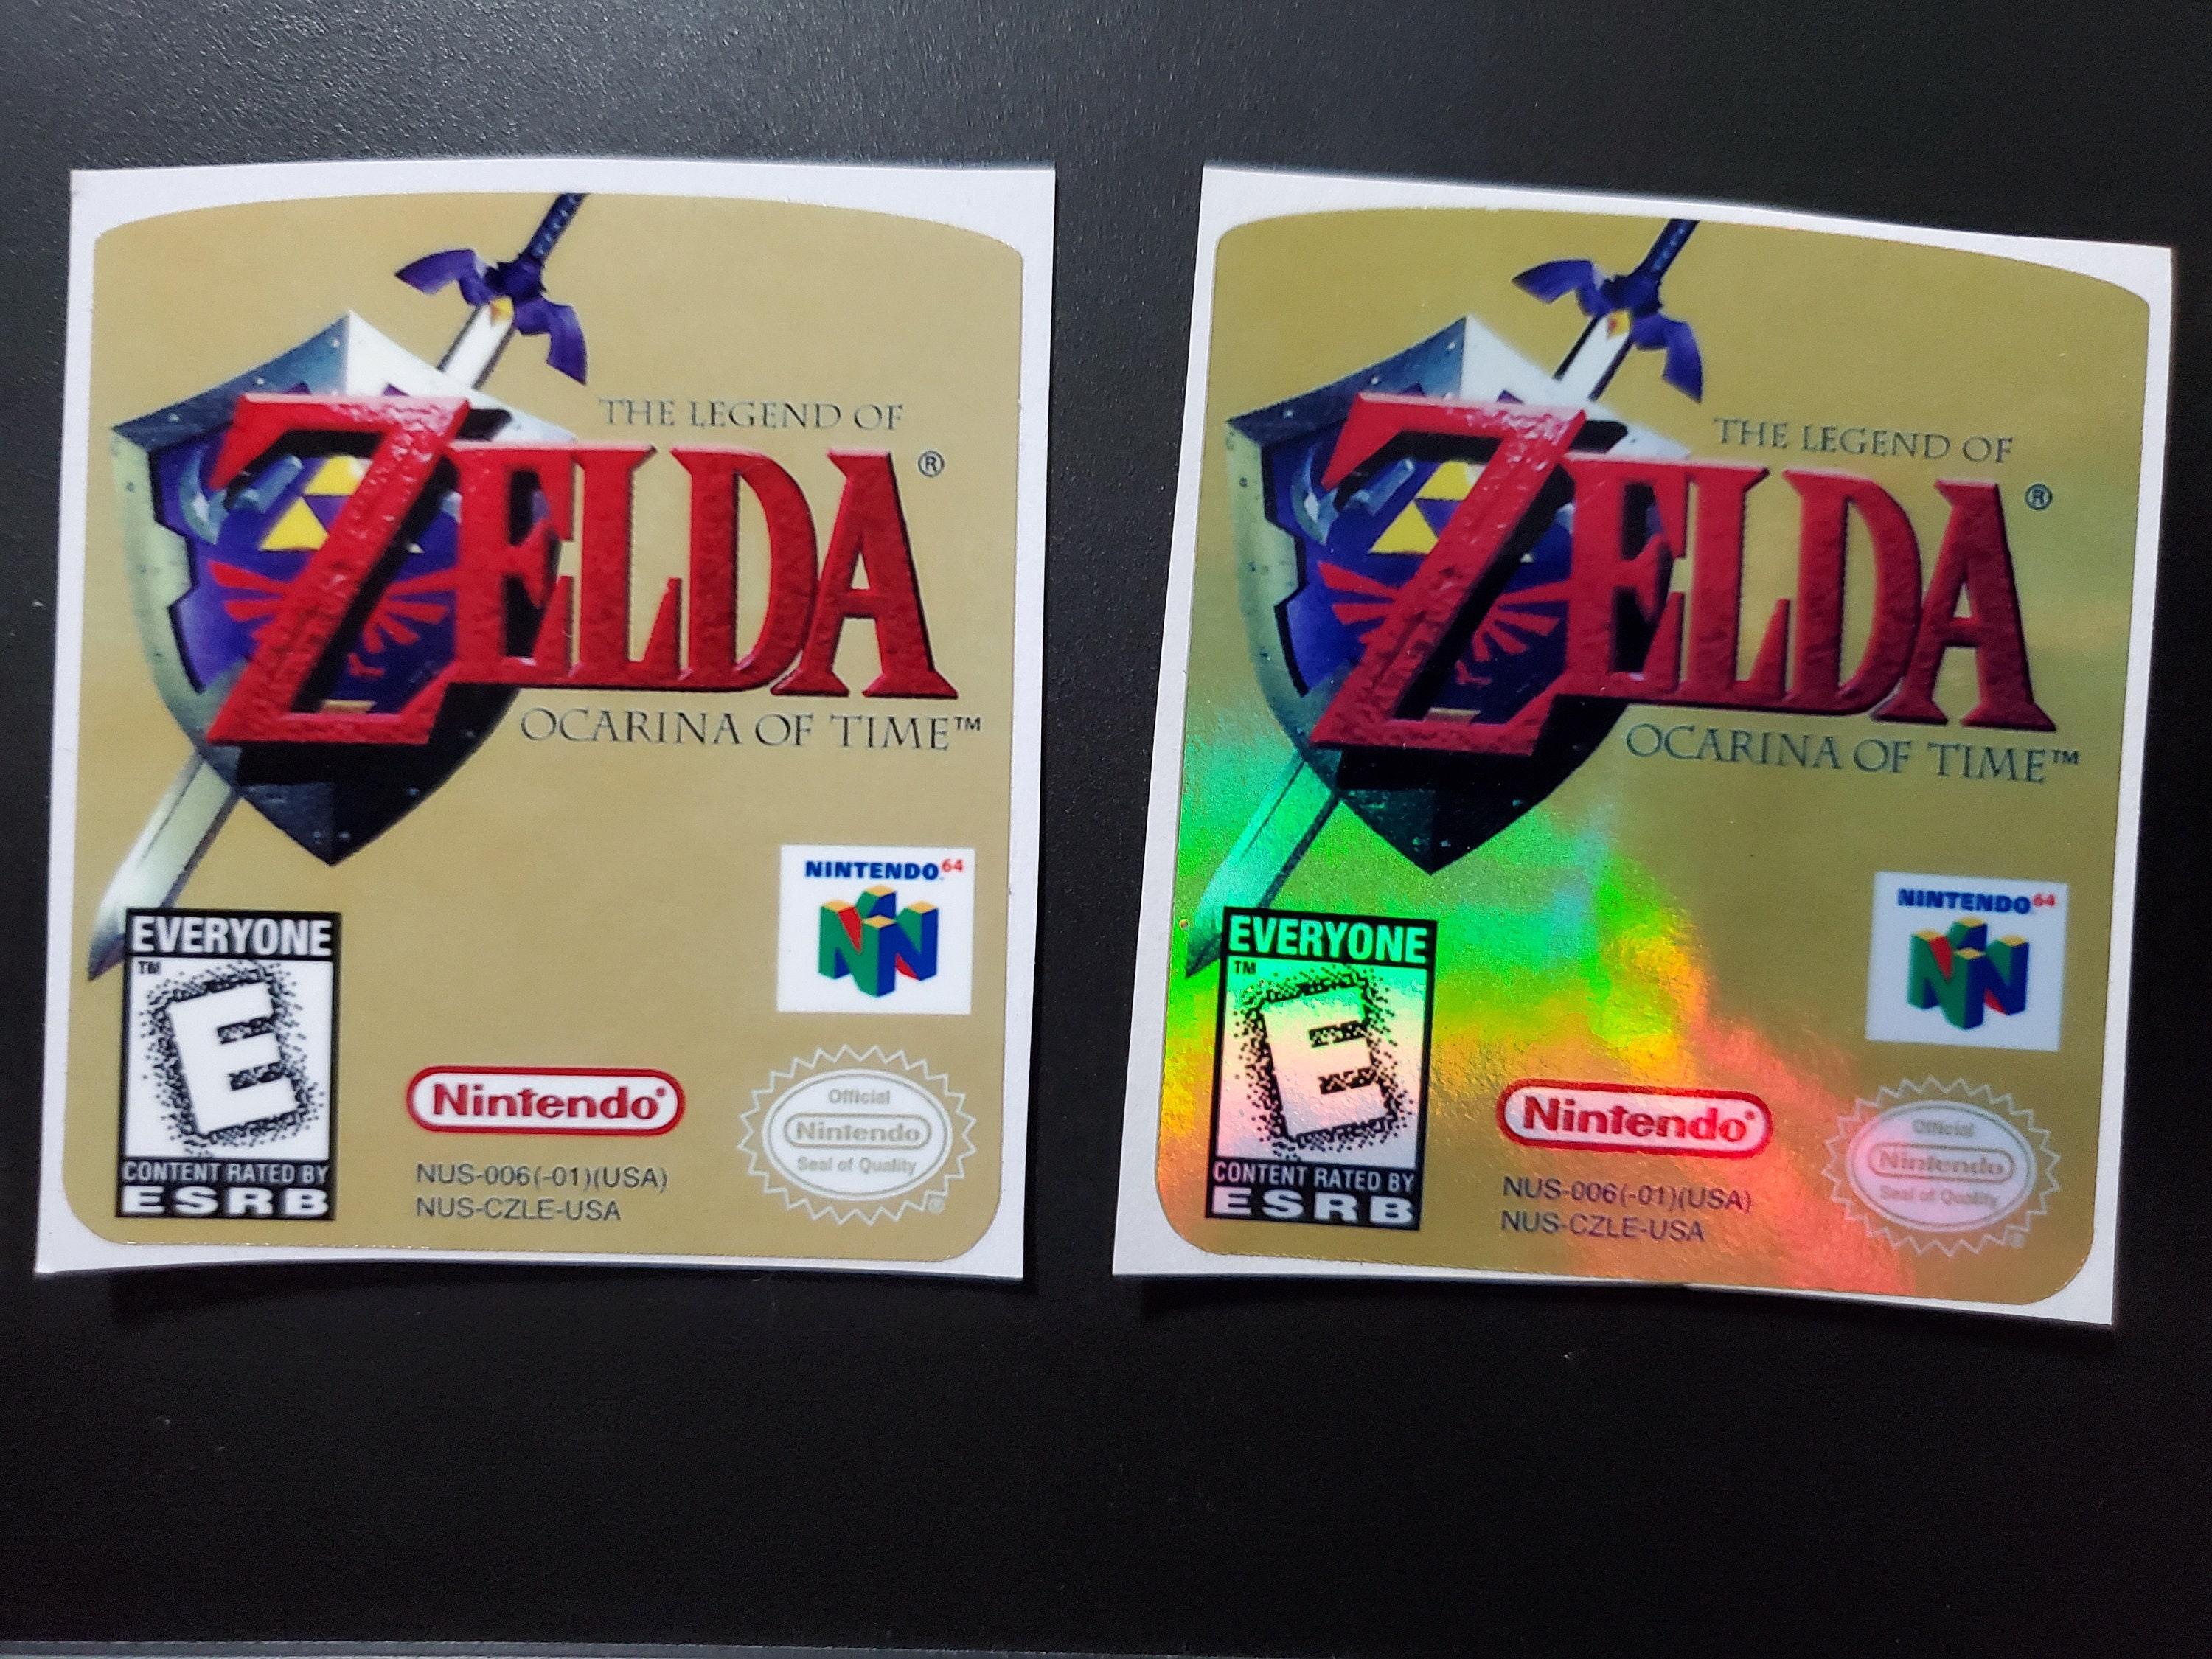 Legend of Zelda Ocarina of Time N64 Replacement Label Die Cut -  Finland